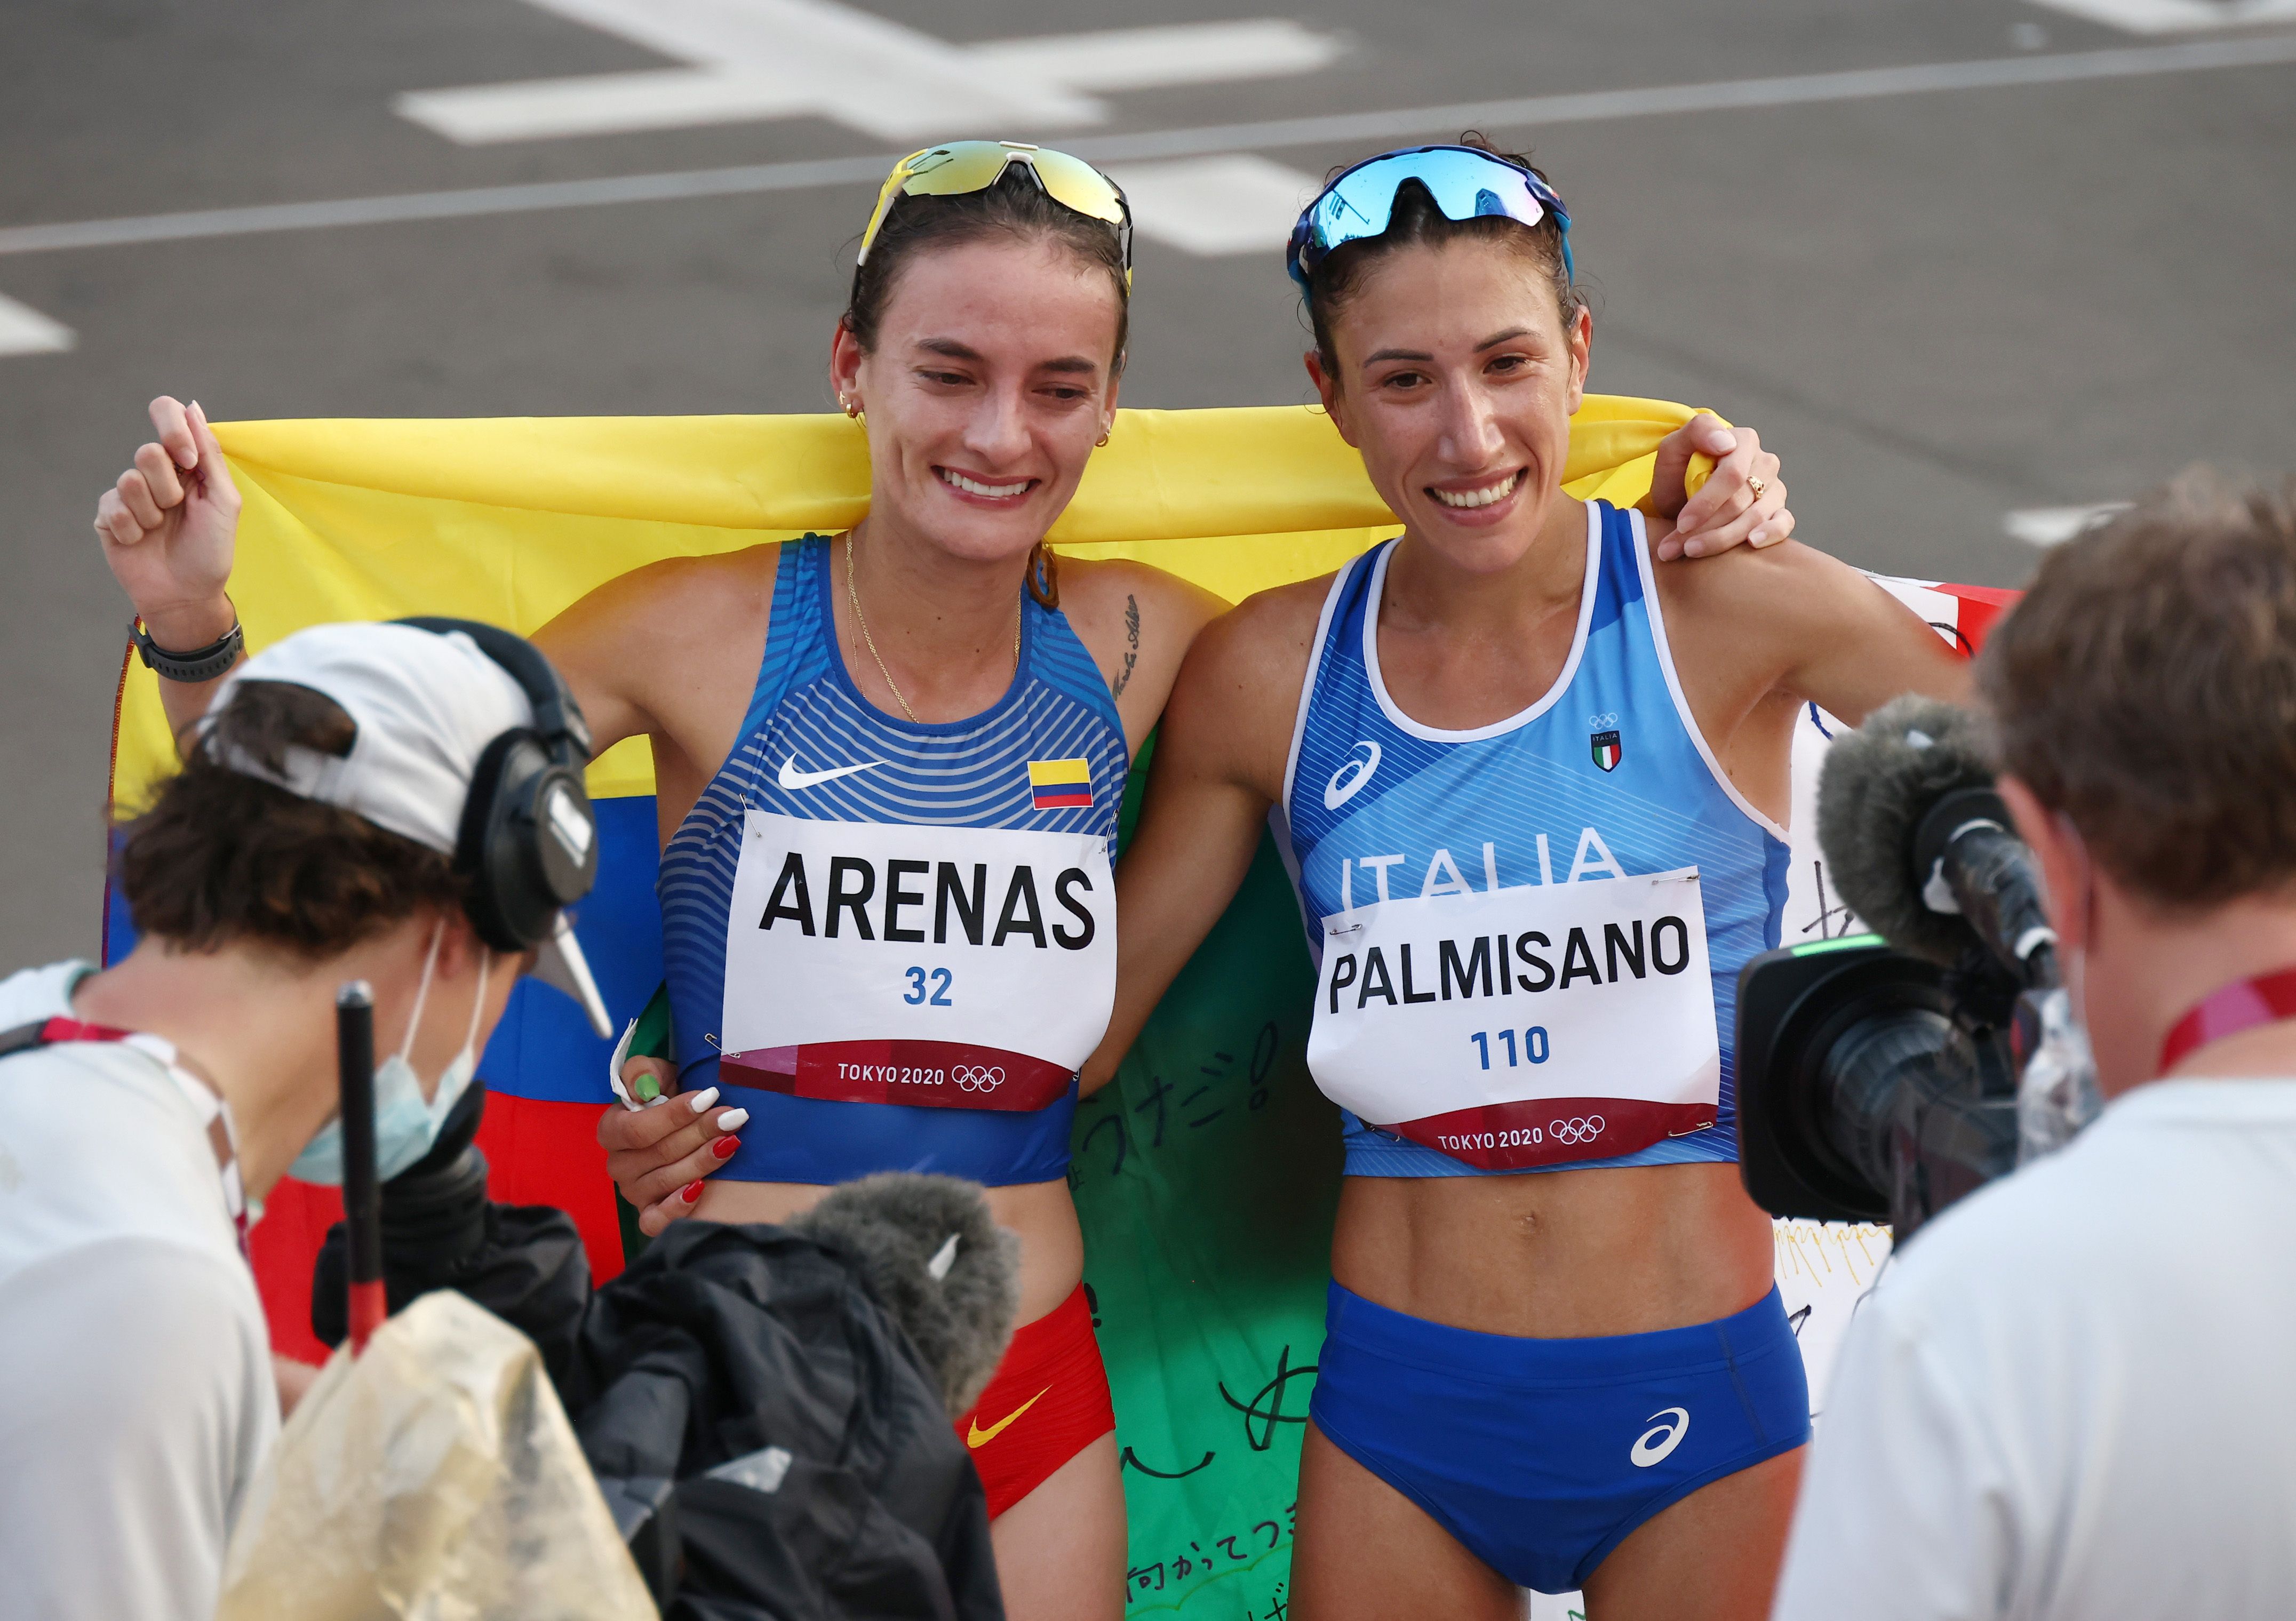 Tokyo 2020 Olympics - Athletics - Women's 20km Walk - Sapporo Odori Park, Sapporo, Japan - August 6, 2021. Gold medallist, Antonella Palmisano of Italy and silver medallist, Sandra Arenas of Colombia pose with their national flags after the race REUTERS/Kim Hong-Ji